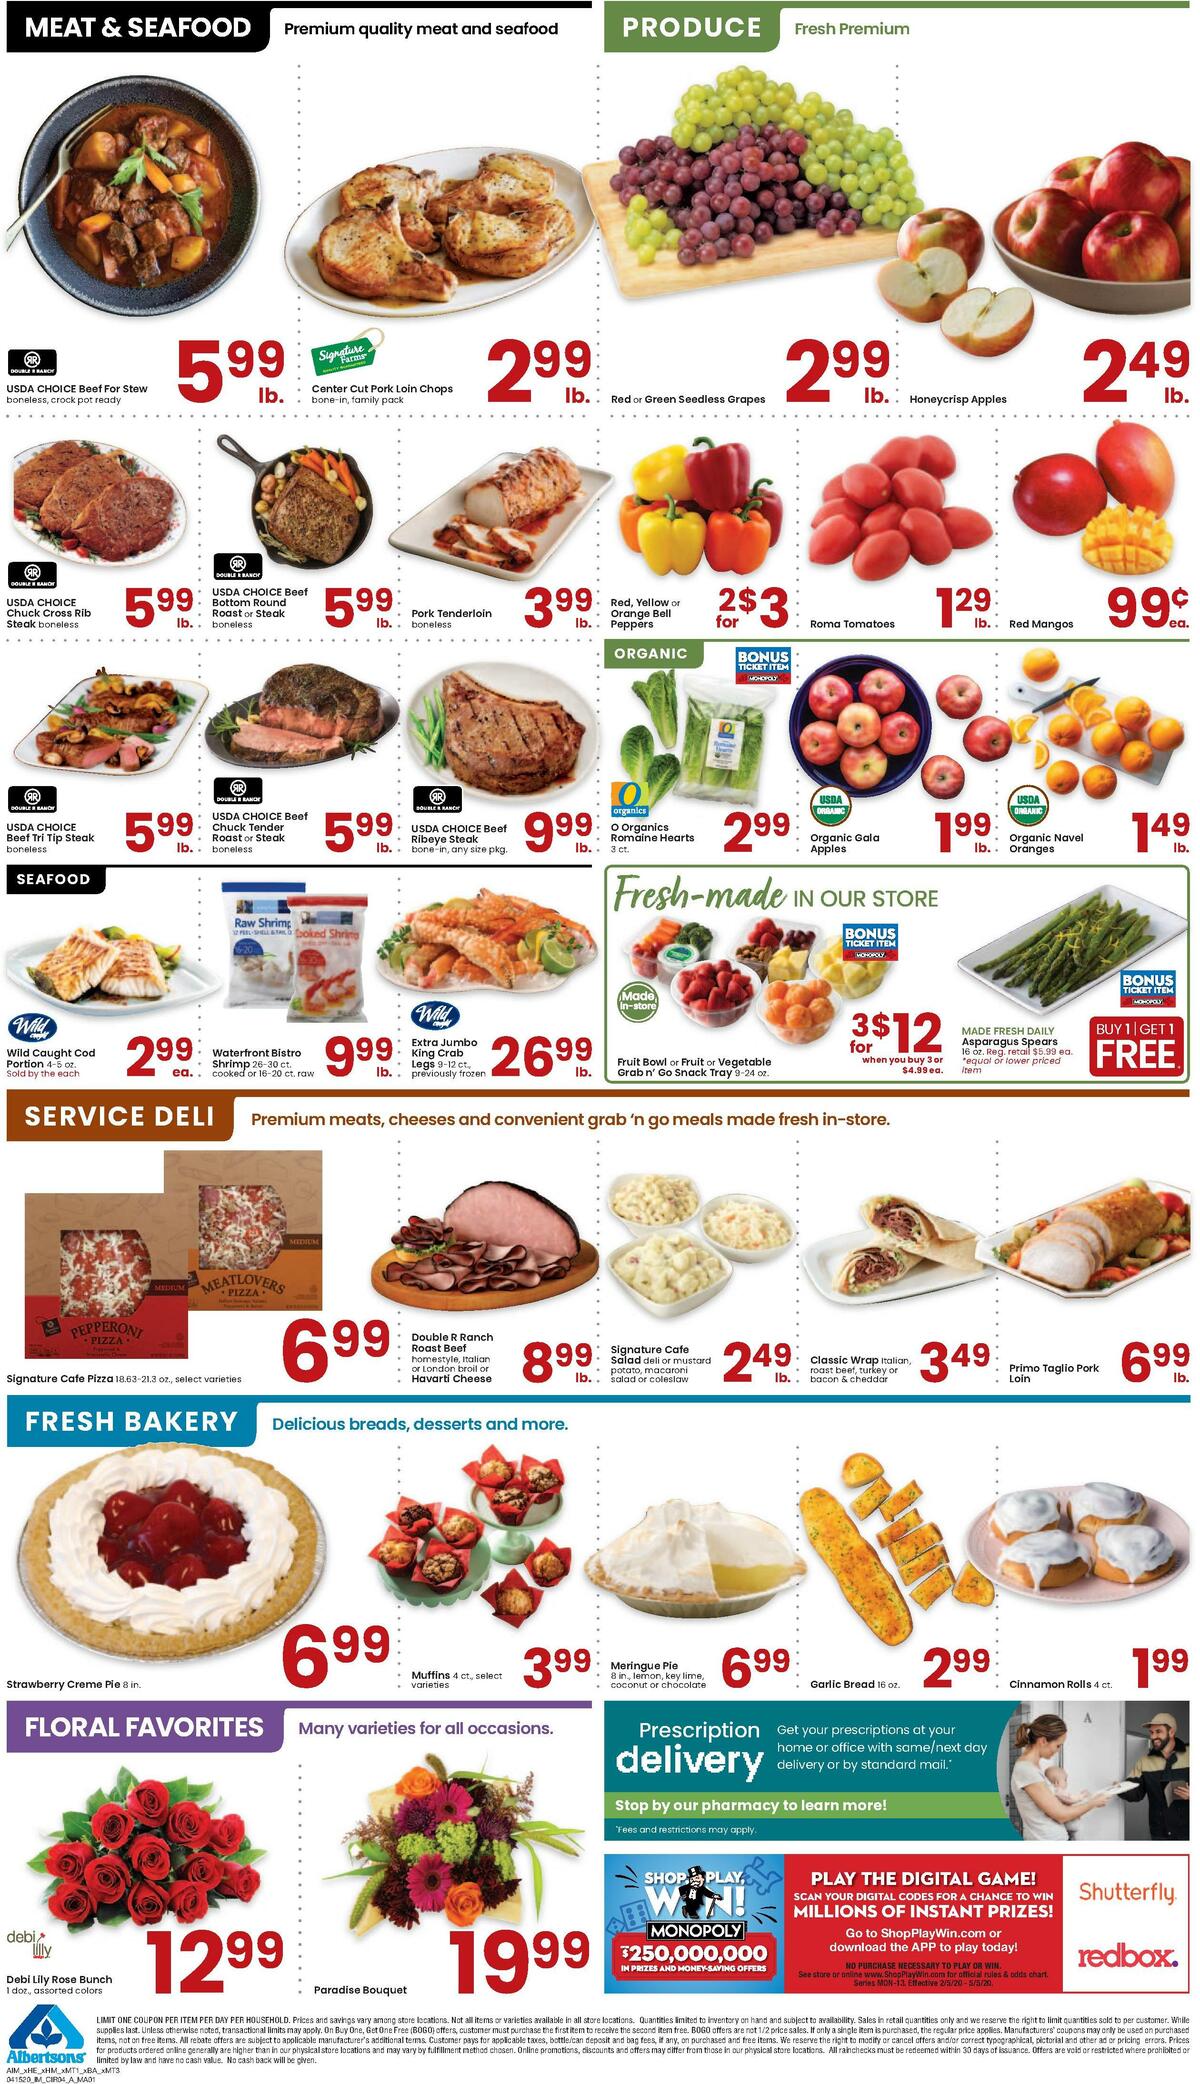 Albertsons Weekly Ad from April 15